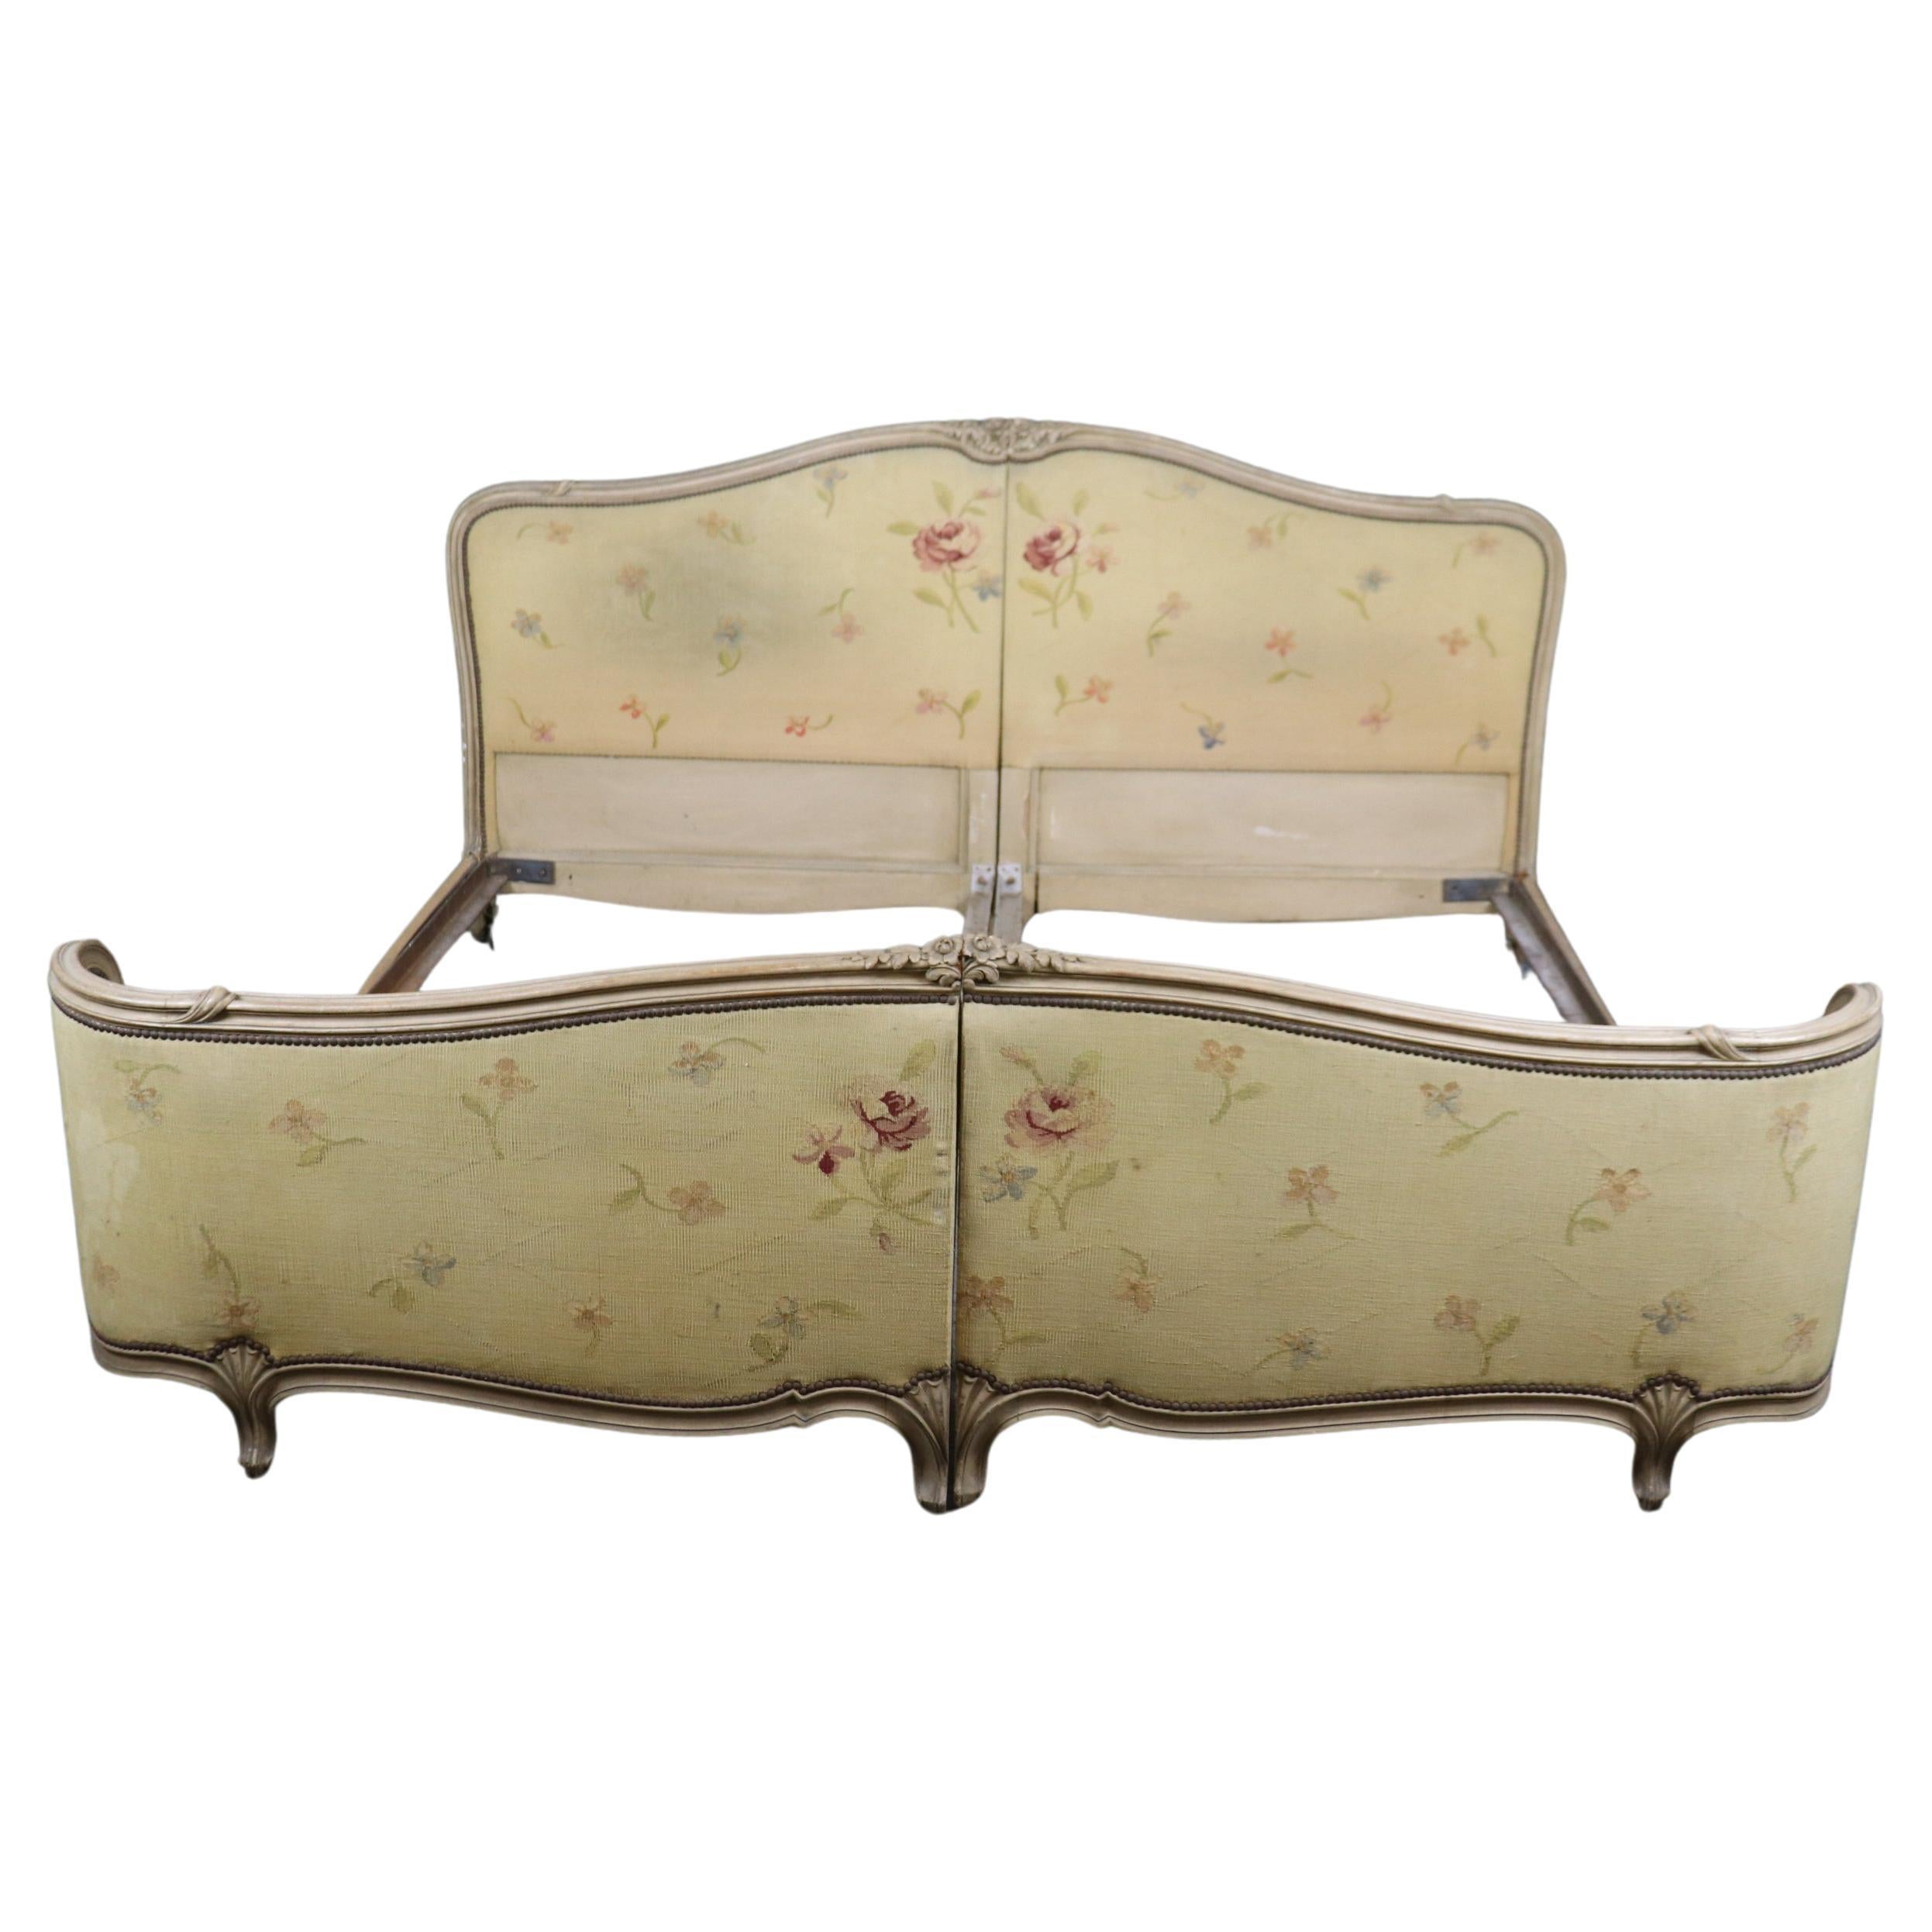 Larger-than-King Size French Folding Antique Carved Louis XV Bed Circa 1920 For Sale